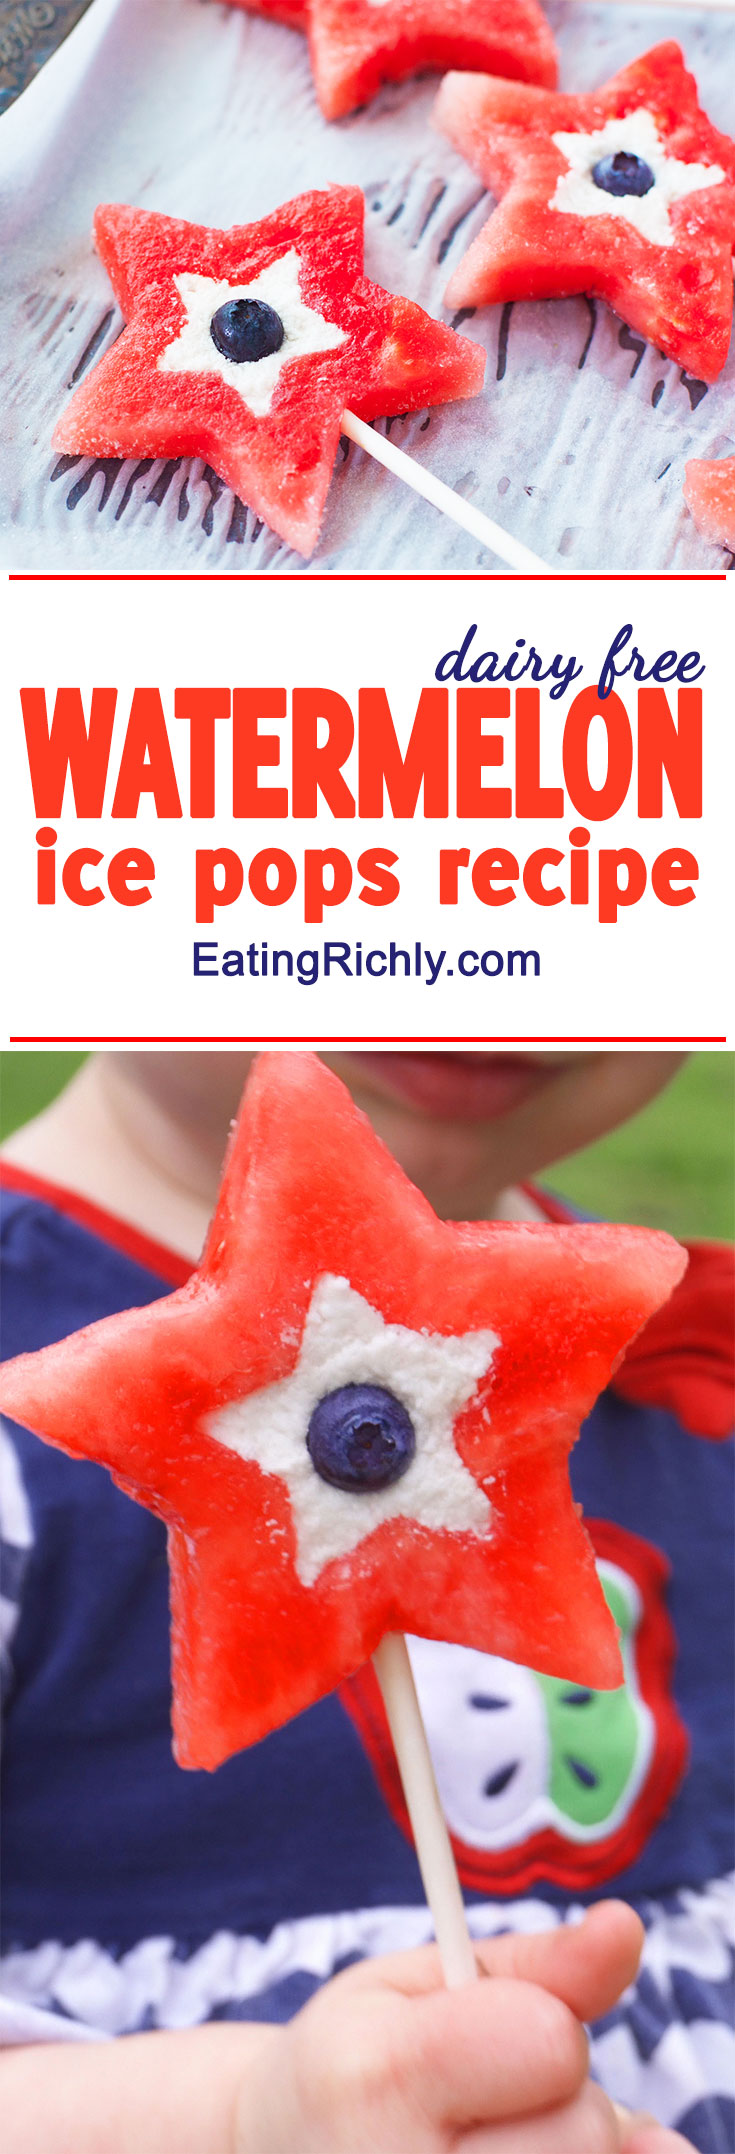 Kids will love making their own cute and healthy treats with this watermelon ice pops recipe. From EatingRichly.com